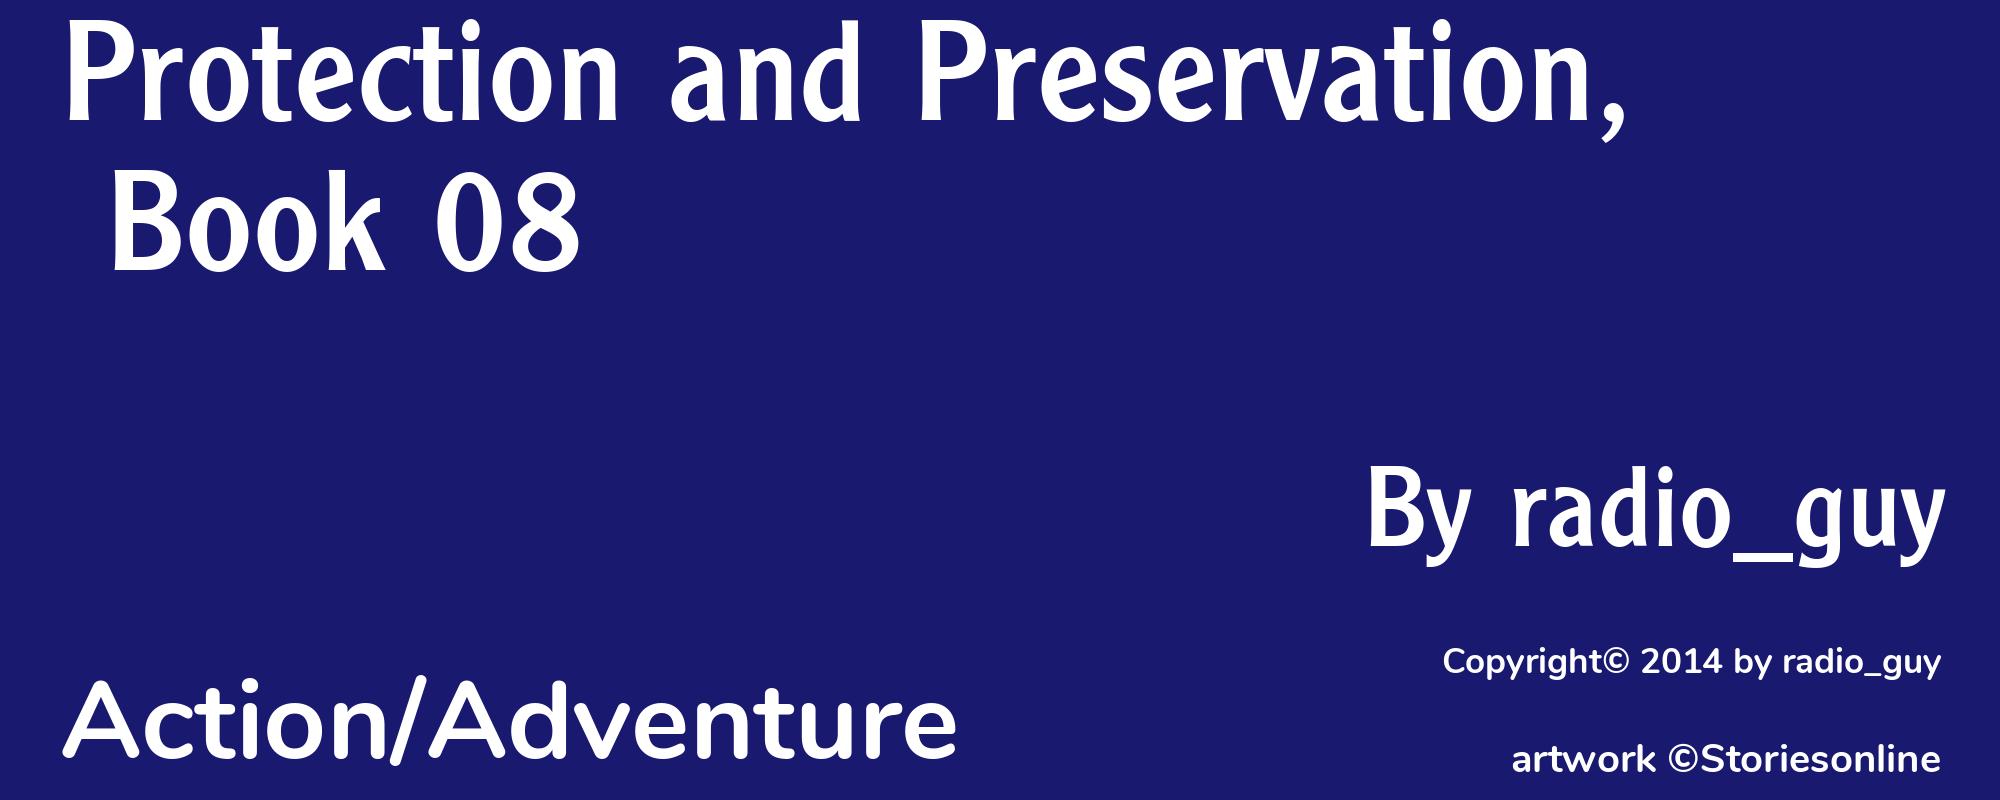 Protection and Preservation, Book 08 - Cover